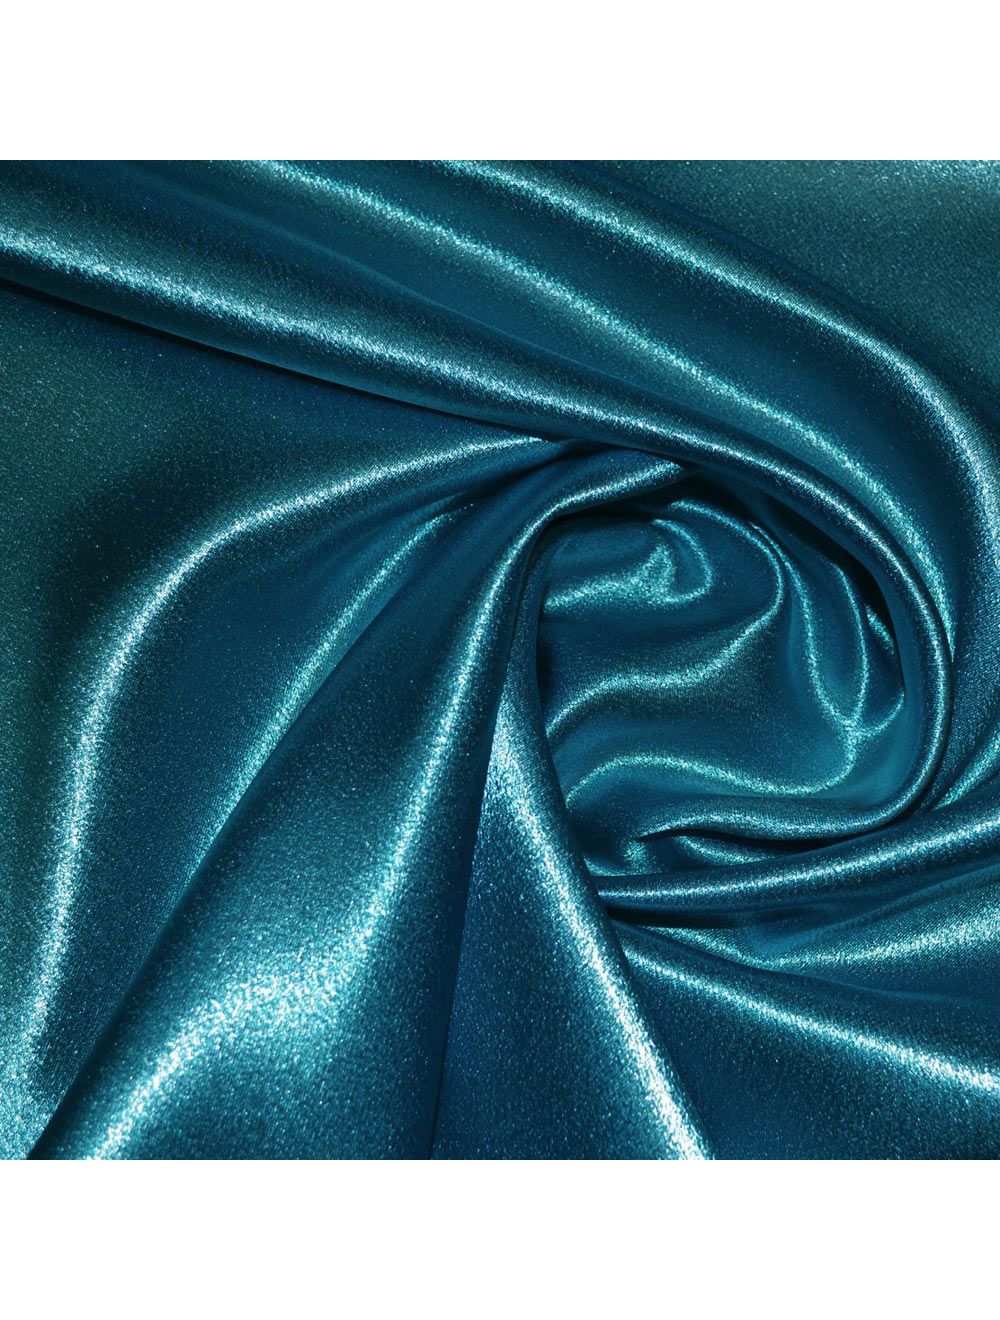 Turquoise Colours Dress Craft Wedding Crepe Back Material 58 Plain Silky Satin Fabric 50